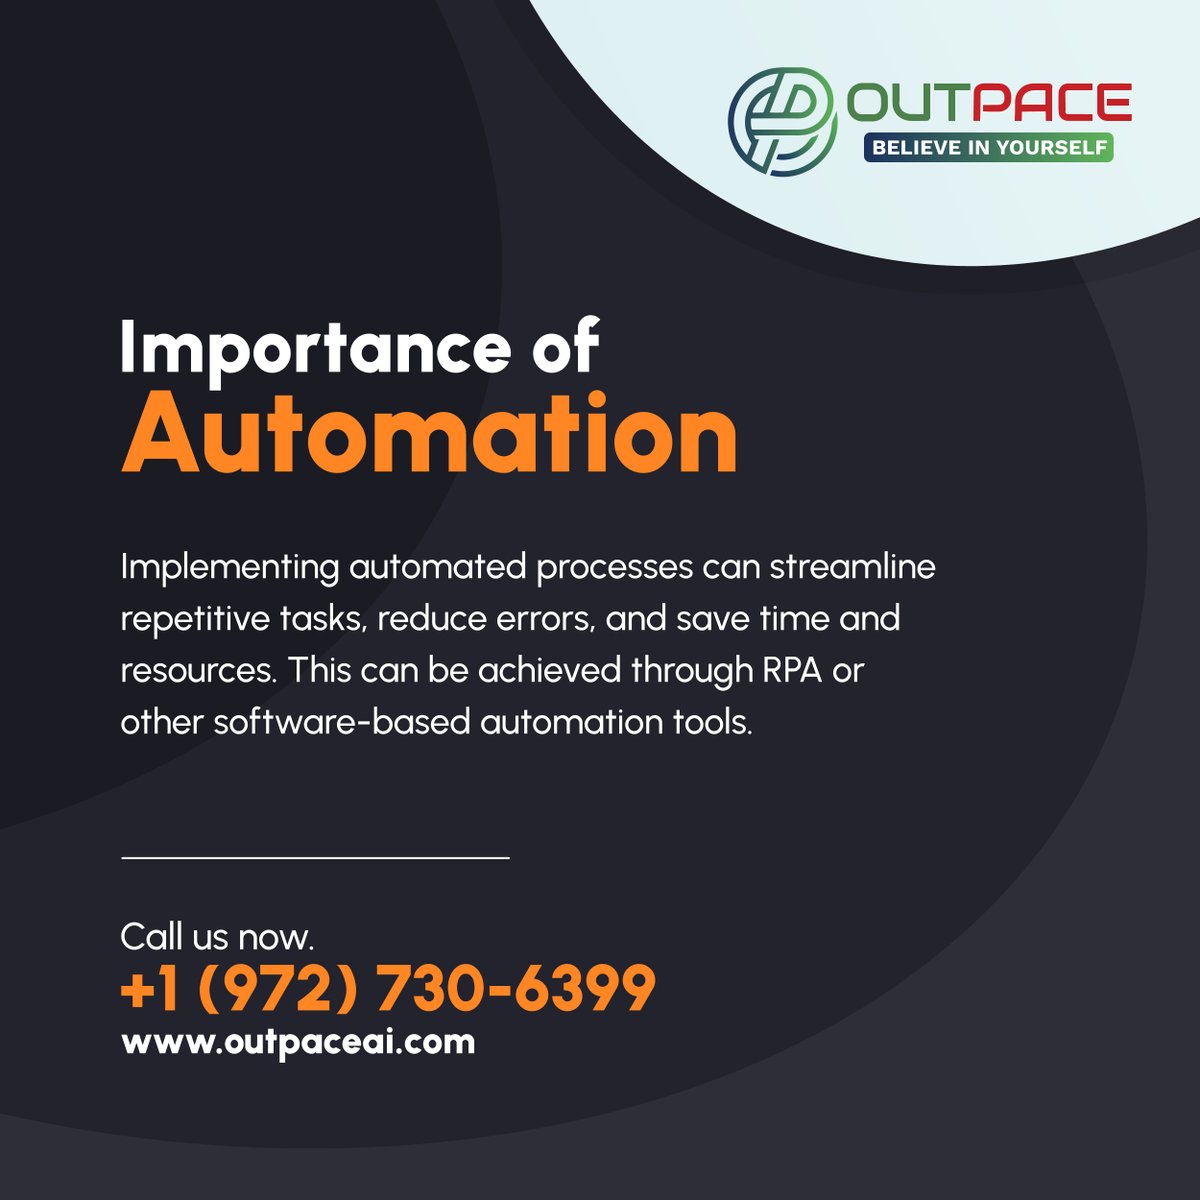 Ready to boost efficiency and save time? Implement automation today and revolutionize your processes for a seamless future.

#IrvingTx #ITServices #AutomationRevolution #SeamlessFuture #ProcessAutomation #AutomateToday #FutureReady #RevolutionizeProcesses #ProcessInnovation